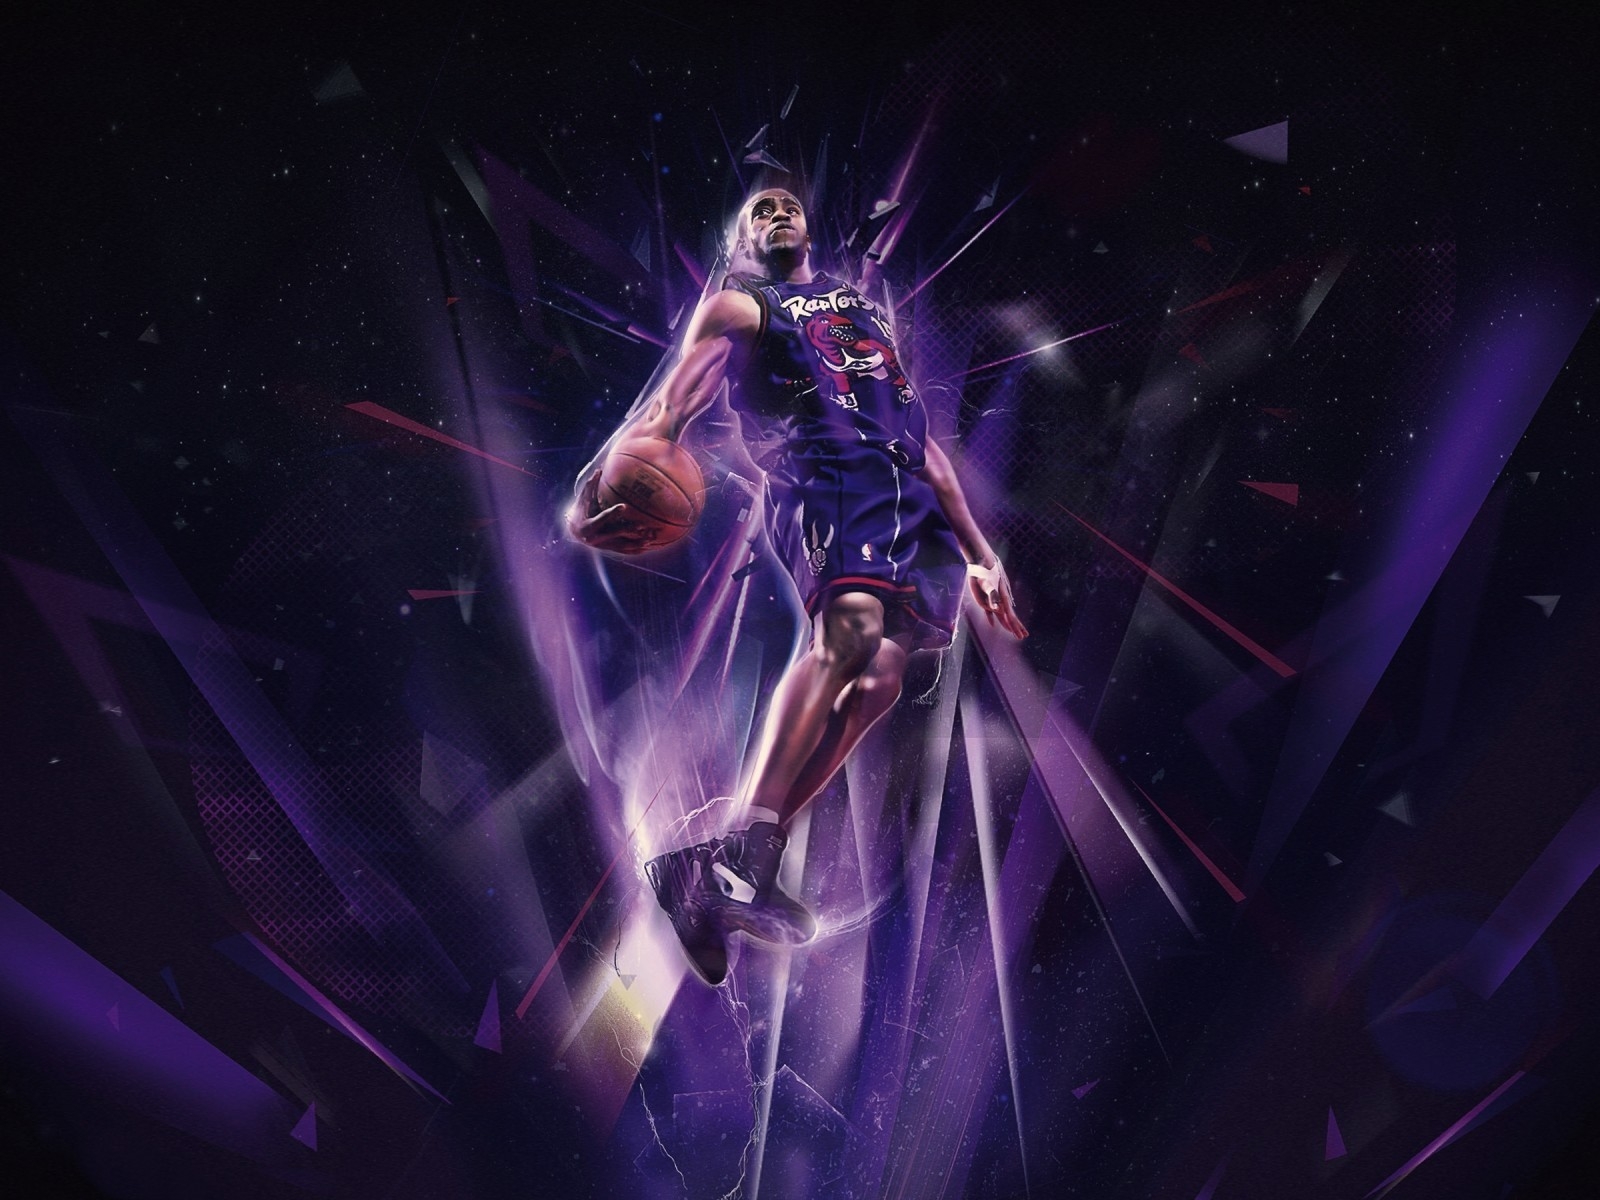 Vince Carter for 1600 x 1200 resolution